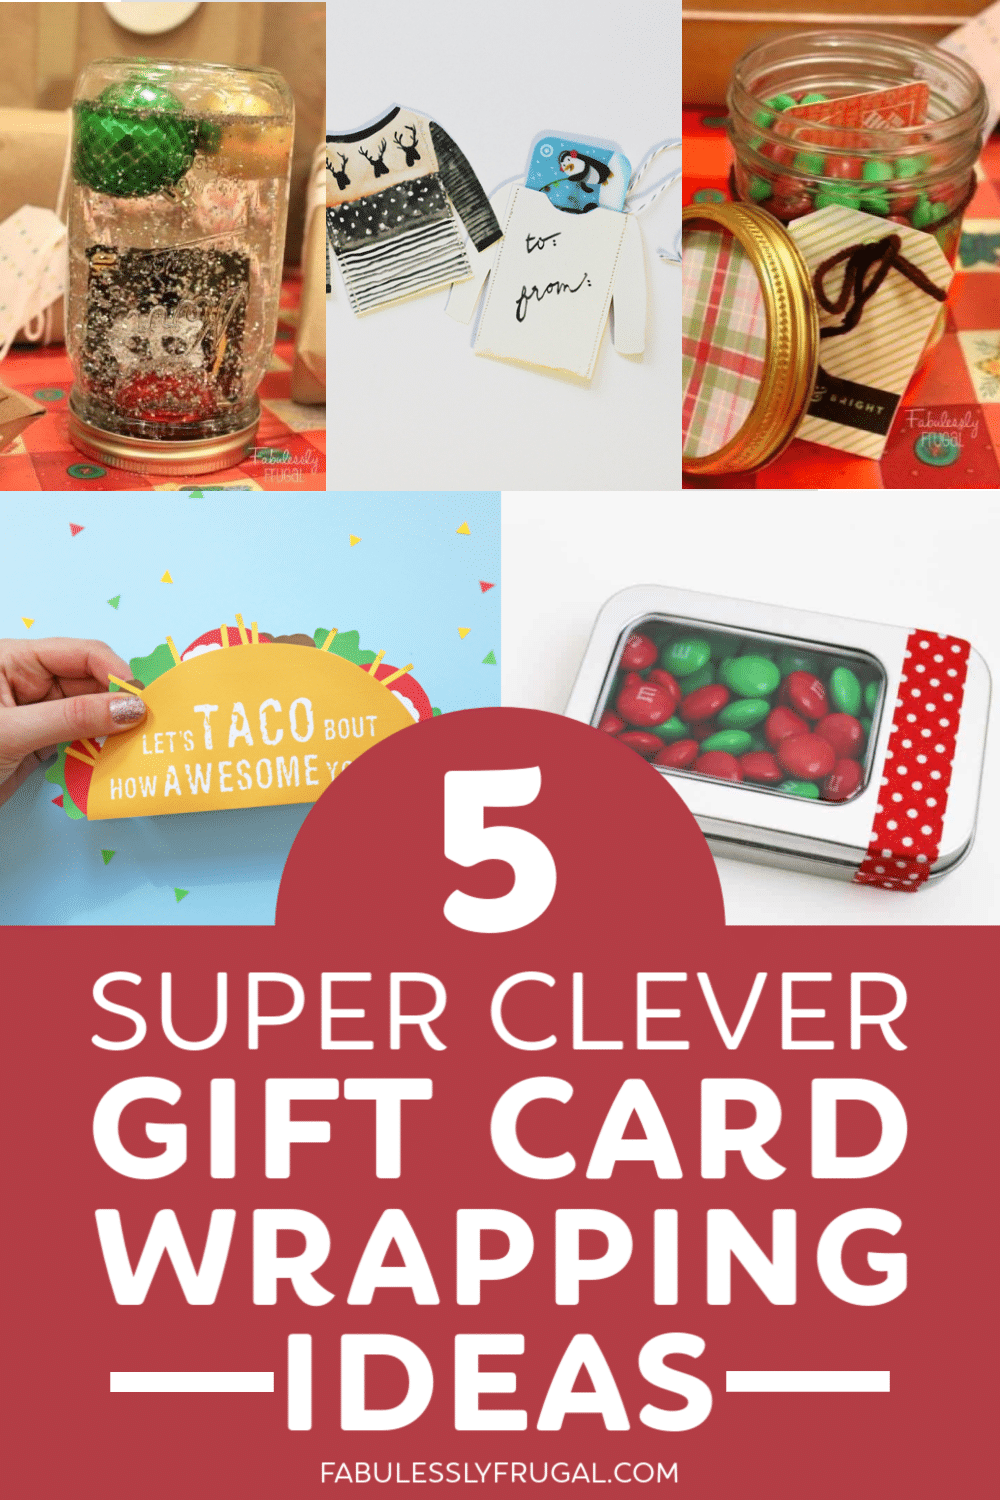 Clever gift card wrapping ideas